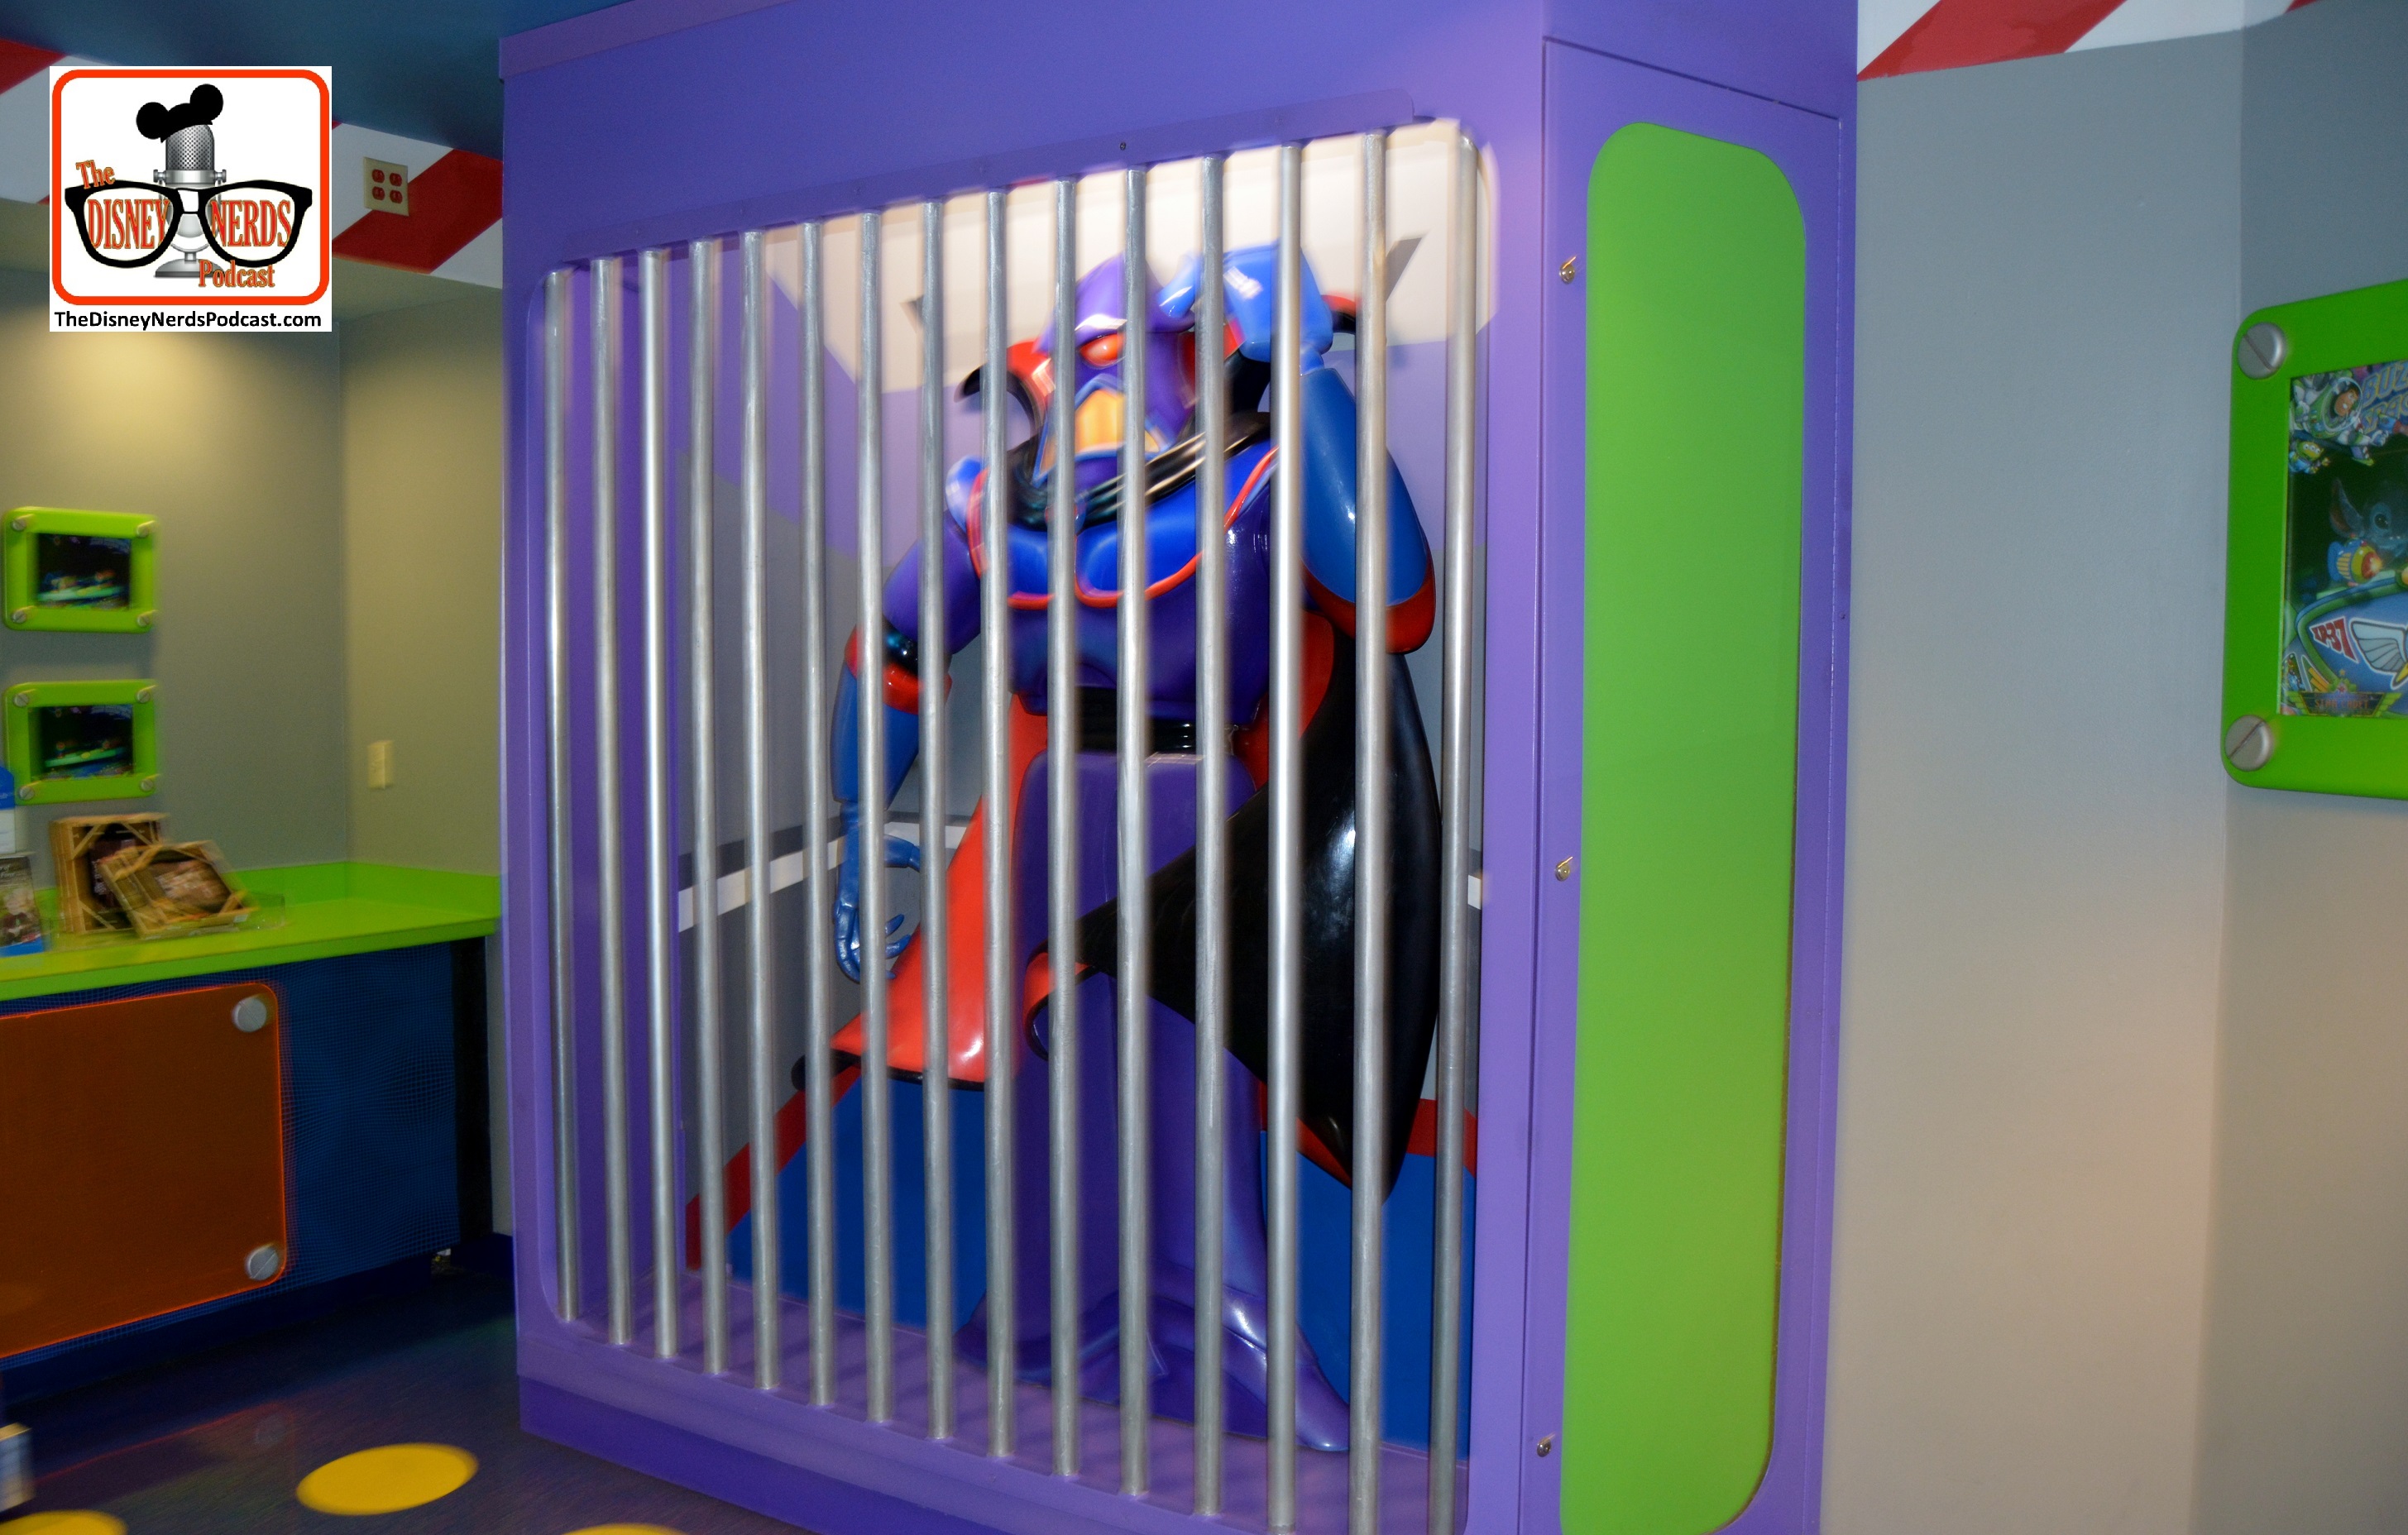 DNP April 2016 Photo Report: Magic Kingdom: Back at Buzz - The Zurg at the exit has more bars - the photo prop of going into the jail with zurg is gone...